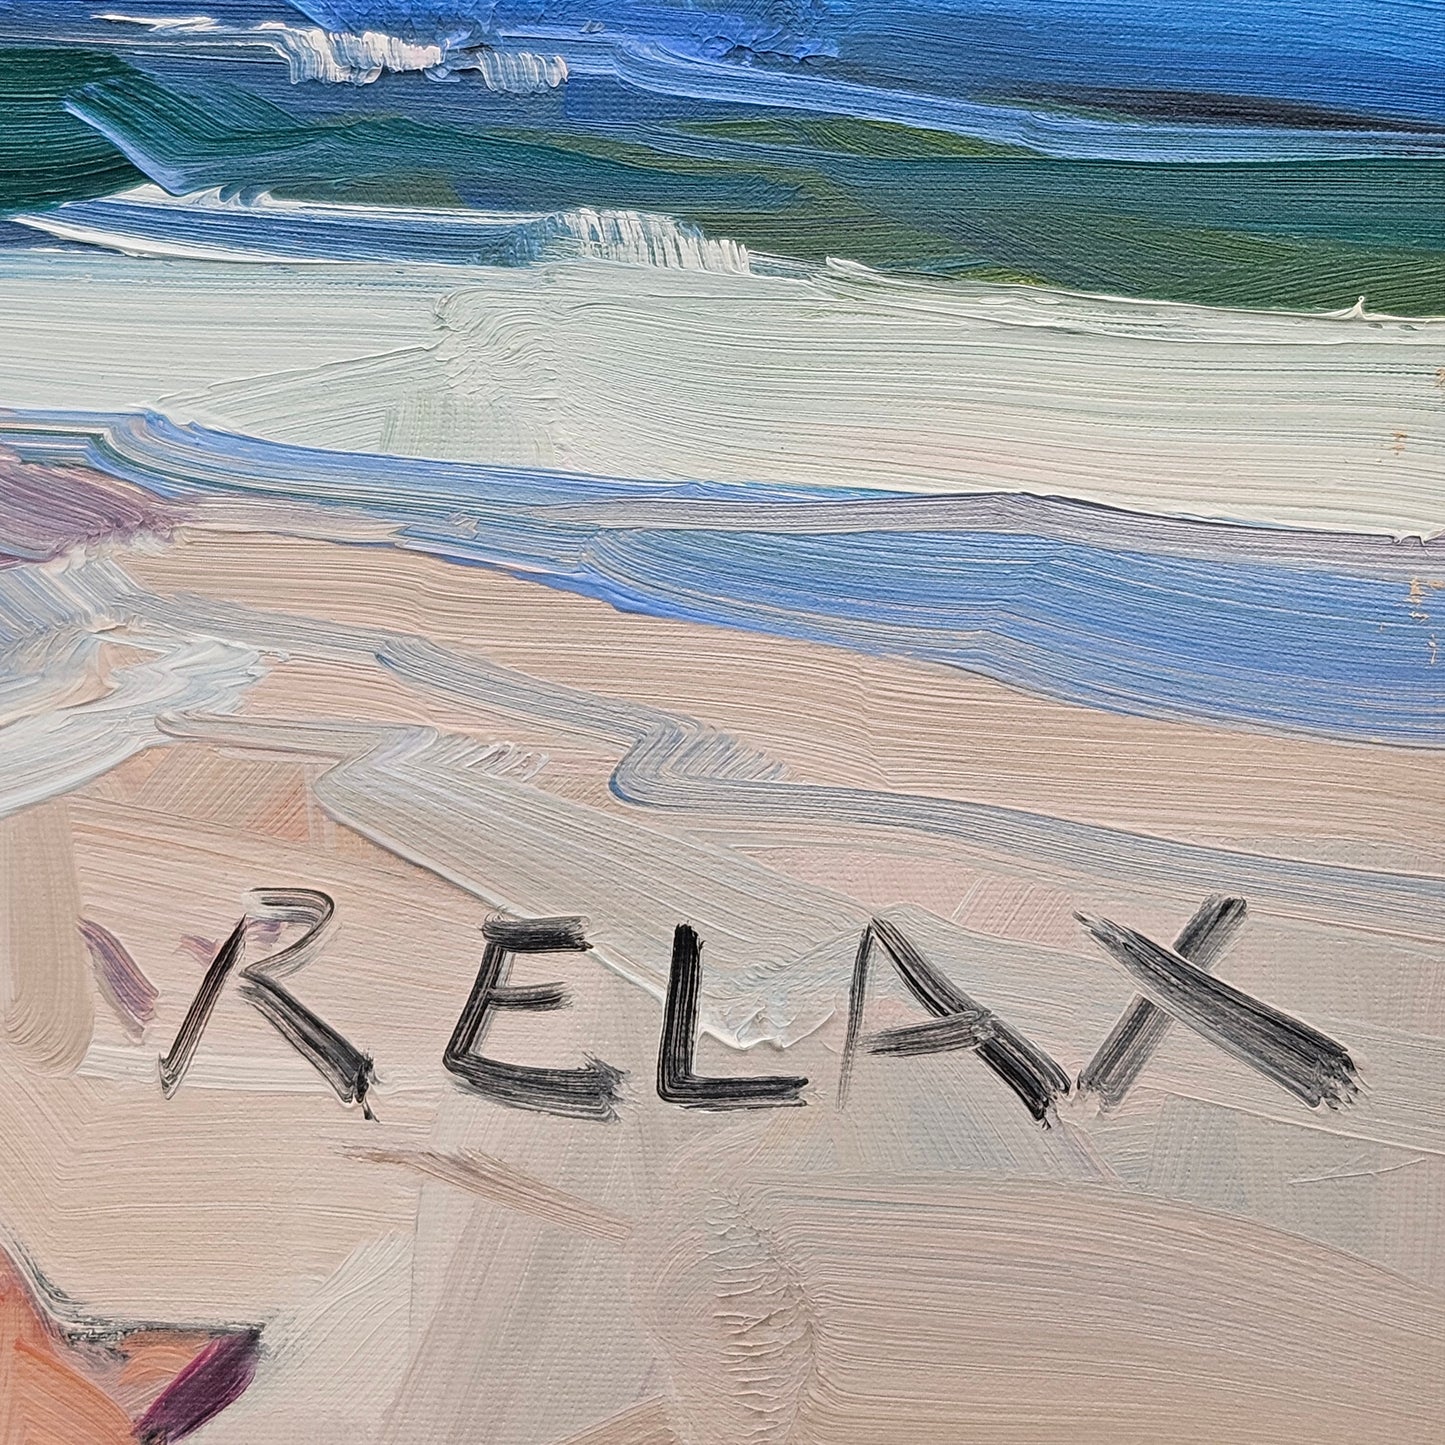 Original Jose Trujillo Oil Painting on Canvas of Beach with Starfish "Relax"